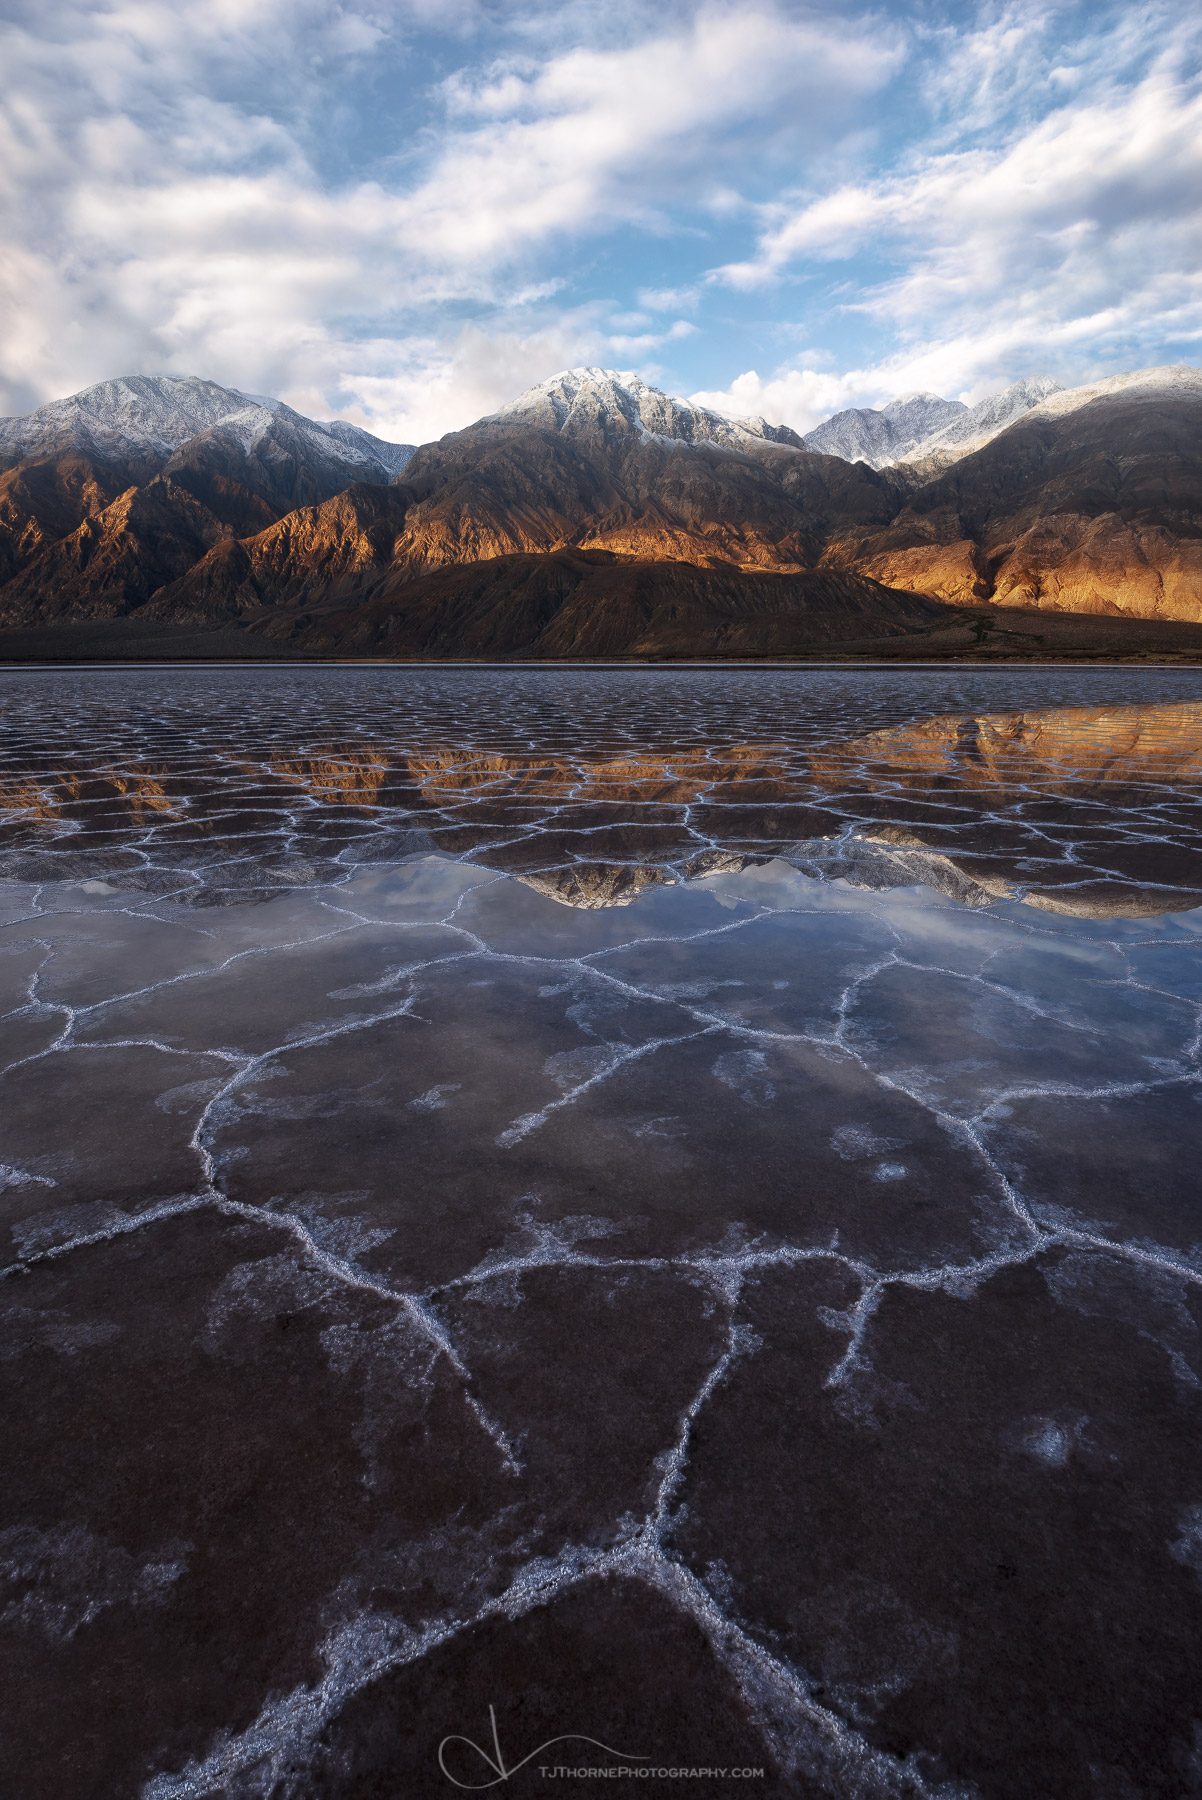 This is a photo of some rare conditions at a remote salt lake in Death Valley National Park, California. Anyone familiar with...